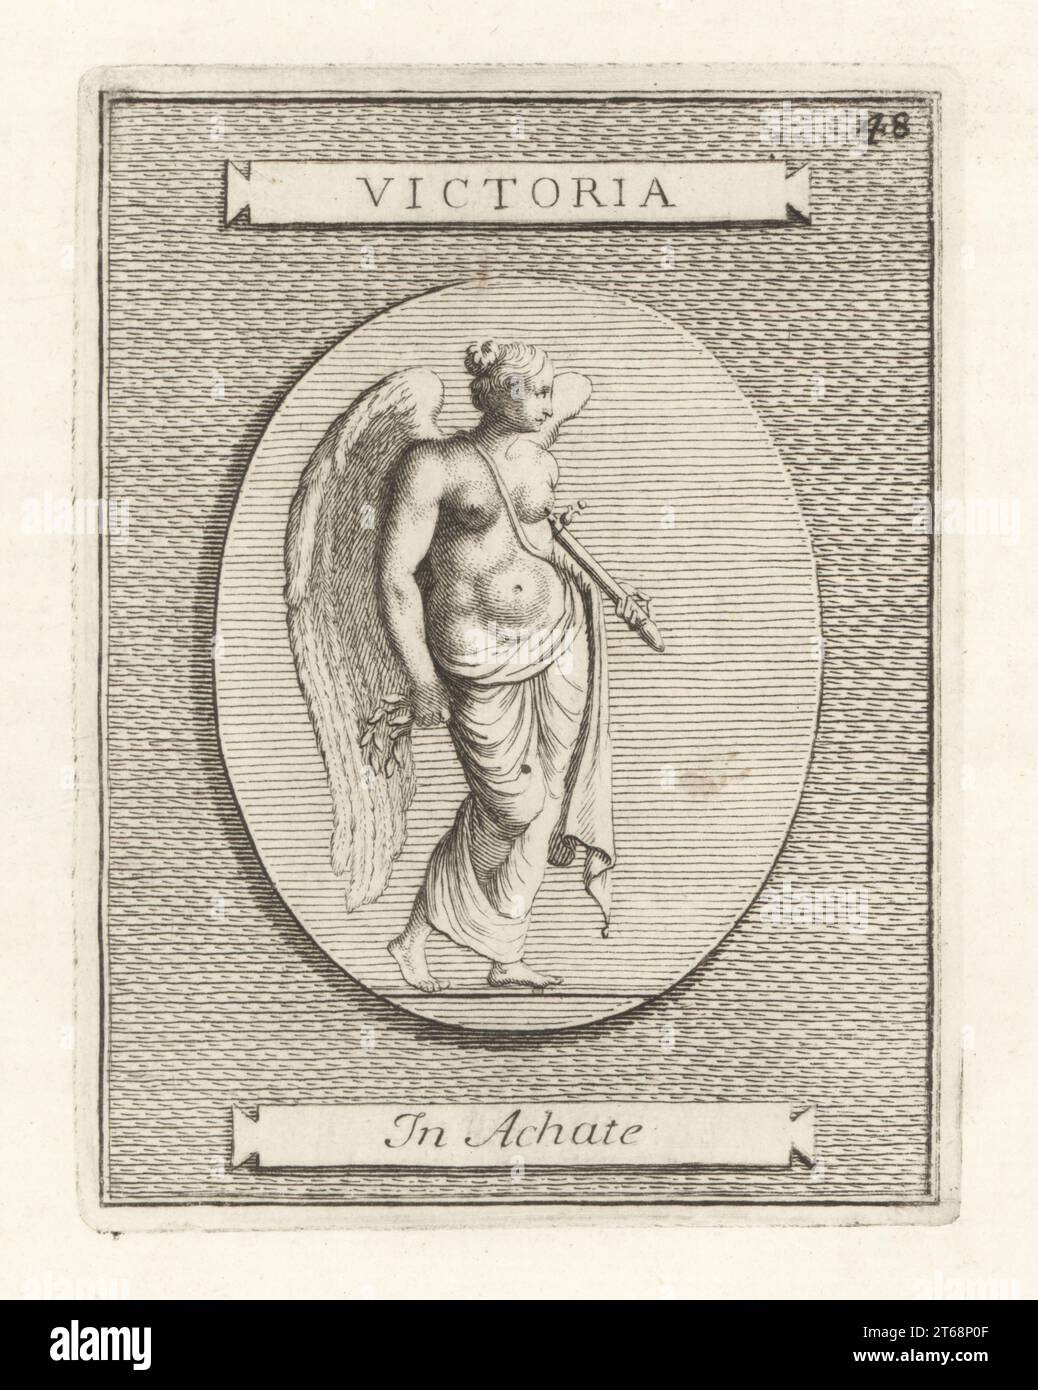 Winged figure of Victoria, Roman deity of victory. Wearing a gold cingulum girdle and holding a laurel crown. From an engraved agate gem. Victoria in Achate. Copperplate engraving from Francesco Valesio, Antonio Gori and Ridolfino Venutis Academia Etrusca, Museum Cortonense in quo Vetera Monumenta, (Etruscan Academy or Museum of Cortona), Faustus Amideus, Rome, 1750. Stock Photo